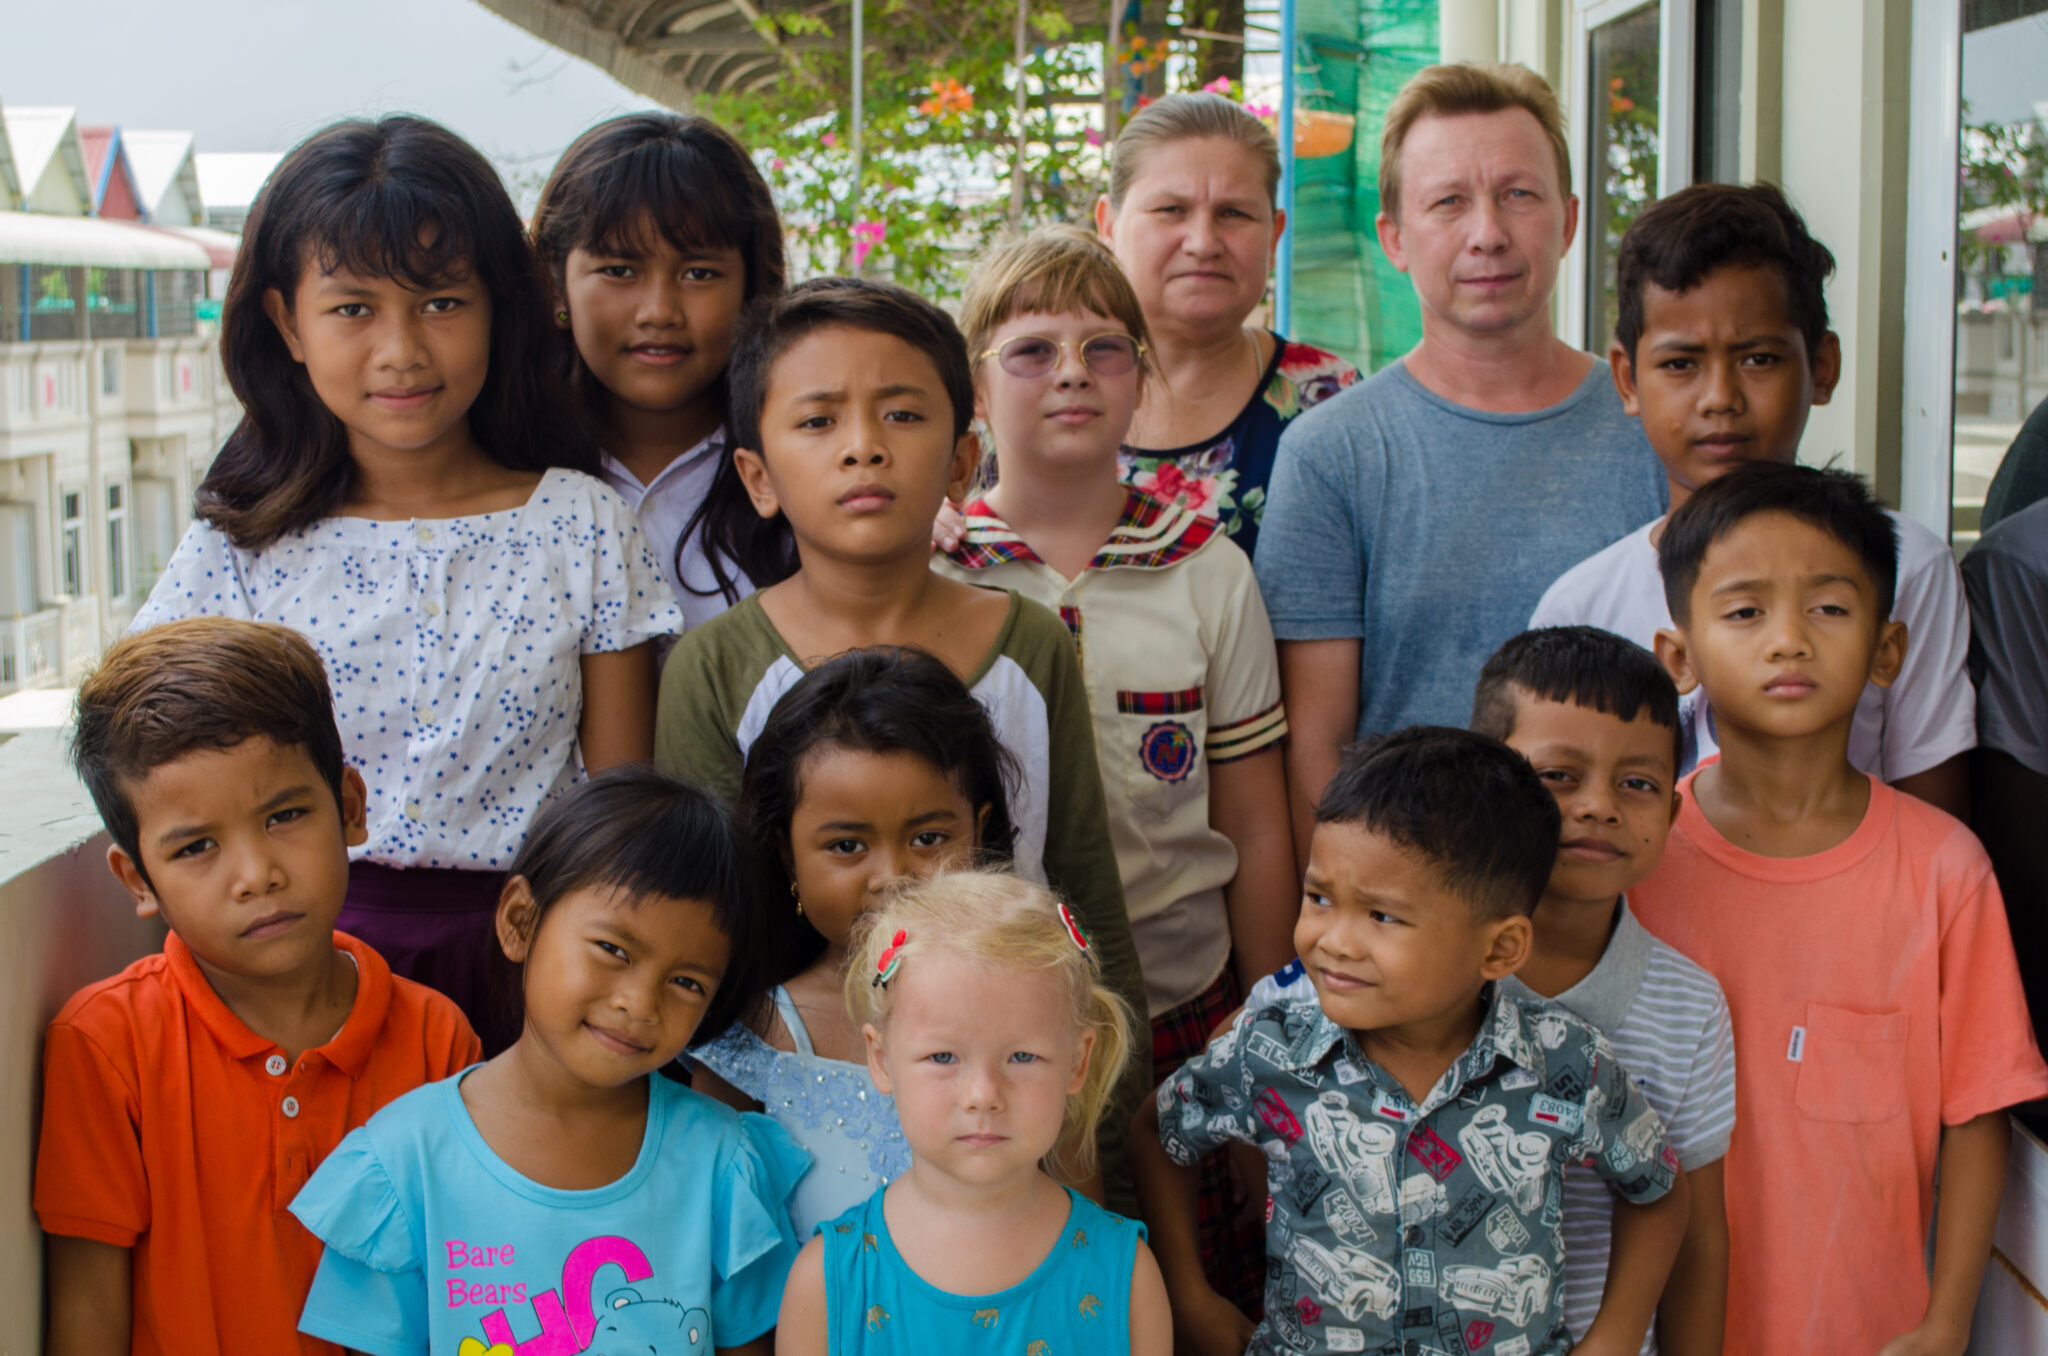 Yevhen Evva, a Missionary from Cambodia, “Each Christian Needs to Find Himself in God.”